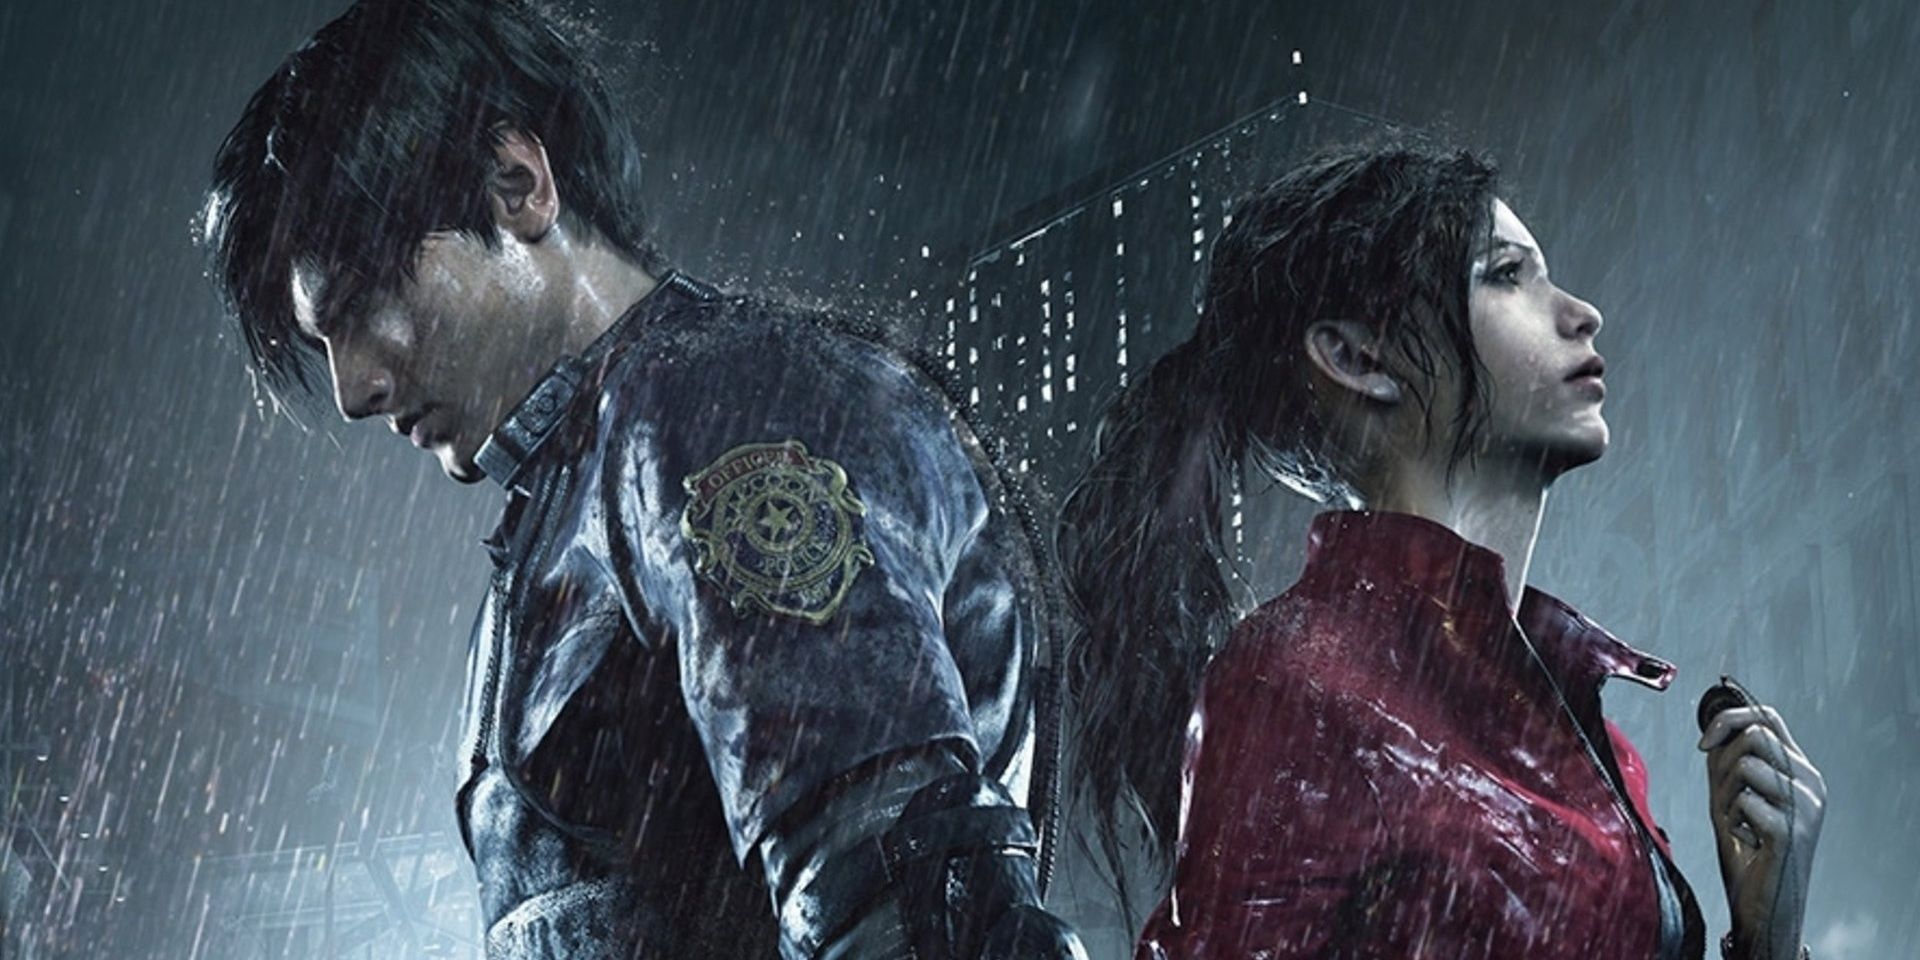 Leon and Claire in the run in Resident Evil 2 